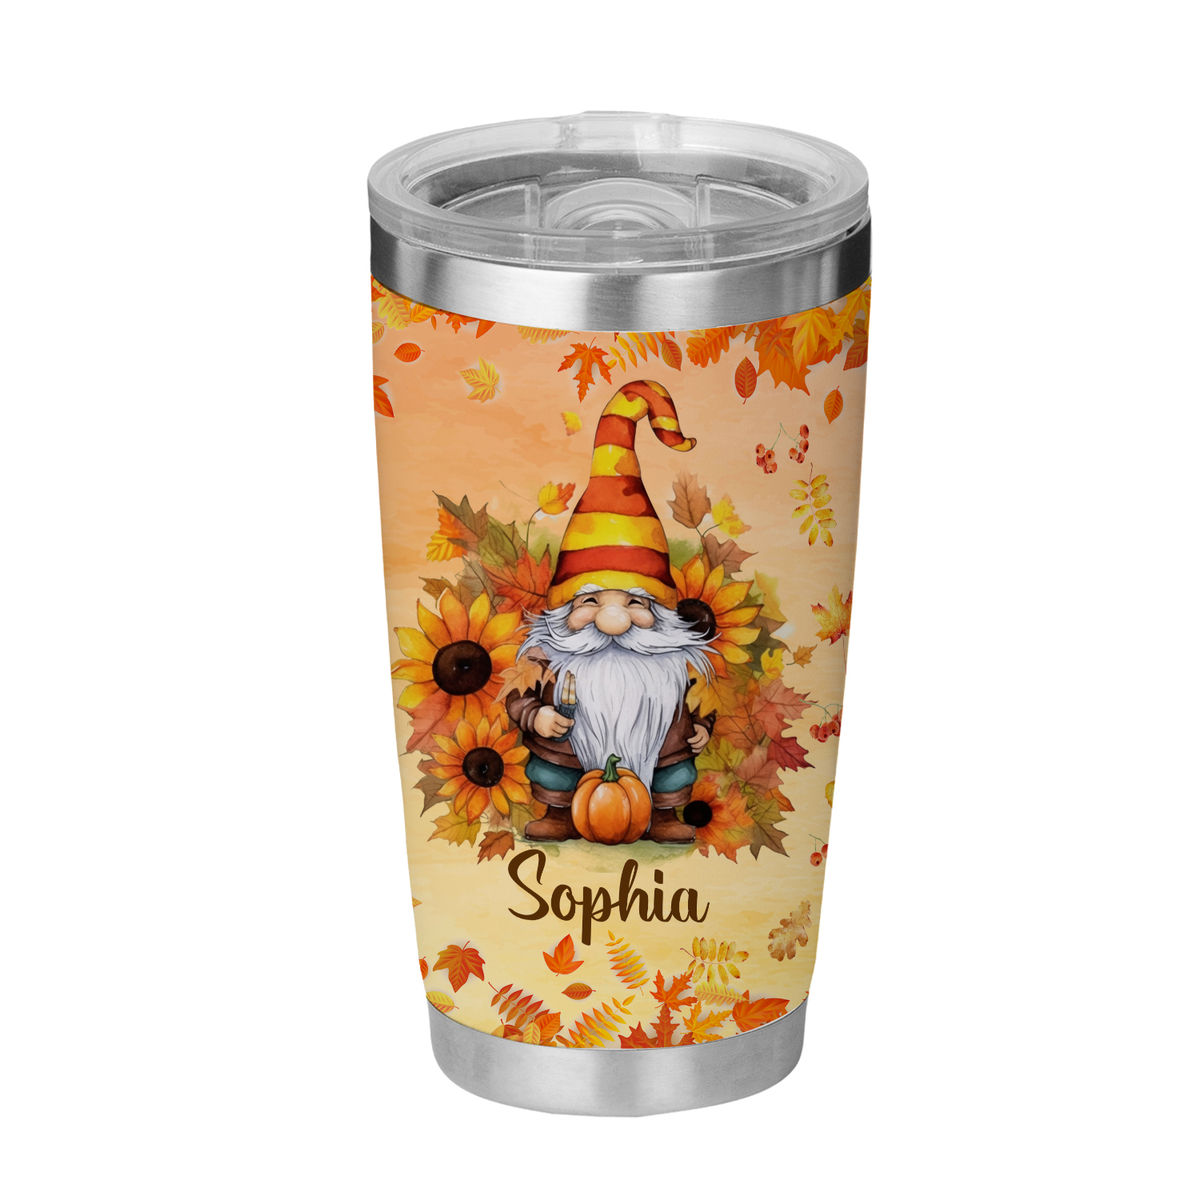 Gnomes Summer 20 Oz. Stainless Steel Skinny Tumbler With Straw.